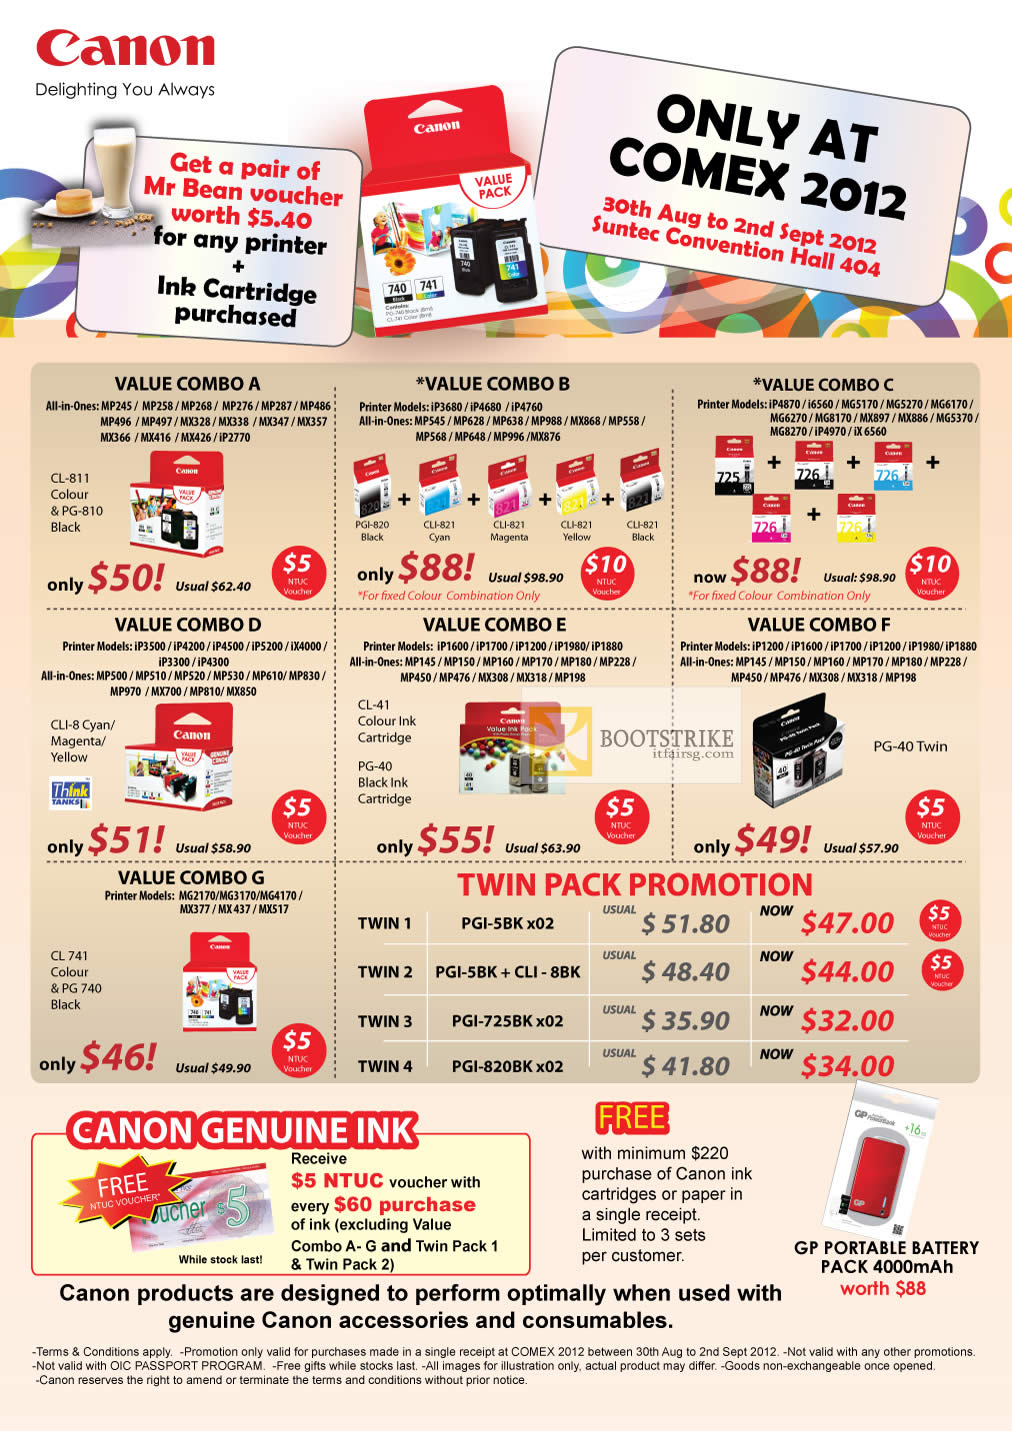 COMEX 2012 price list image brochure of Canon Printers Ink Cartridges Value Combos, Twin Packs